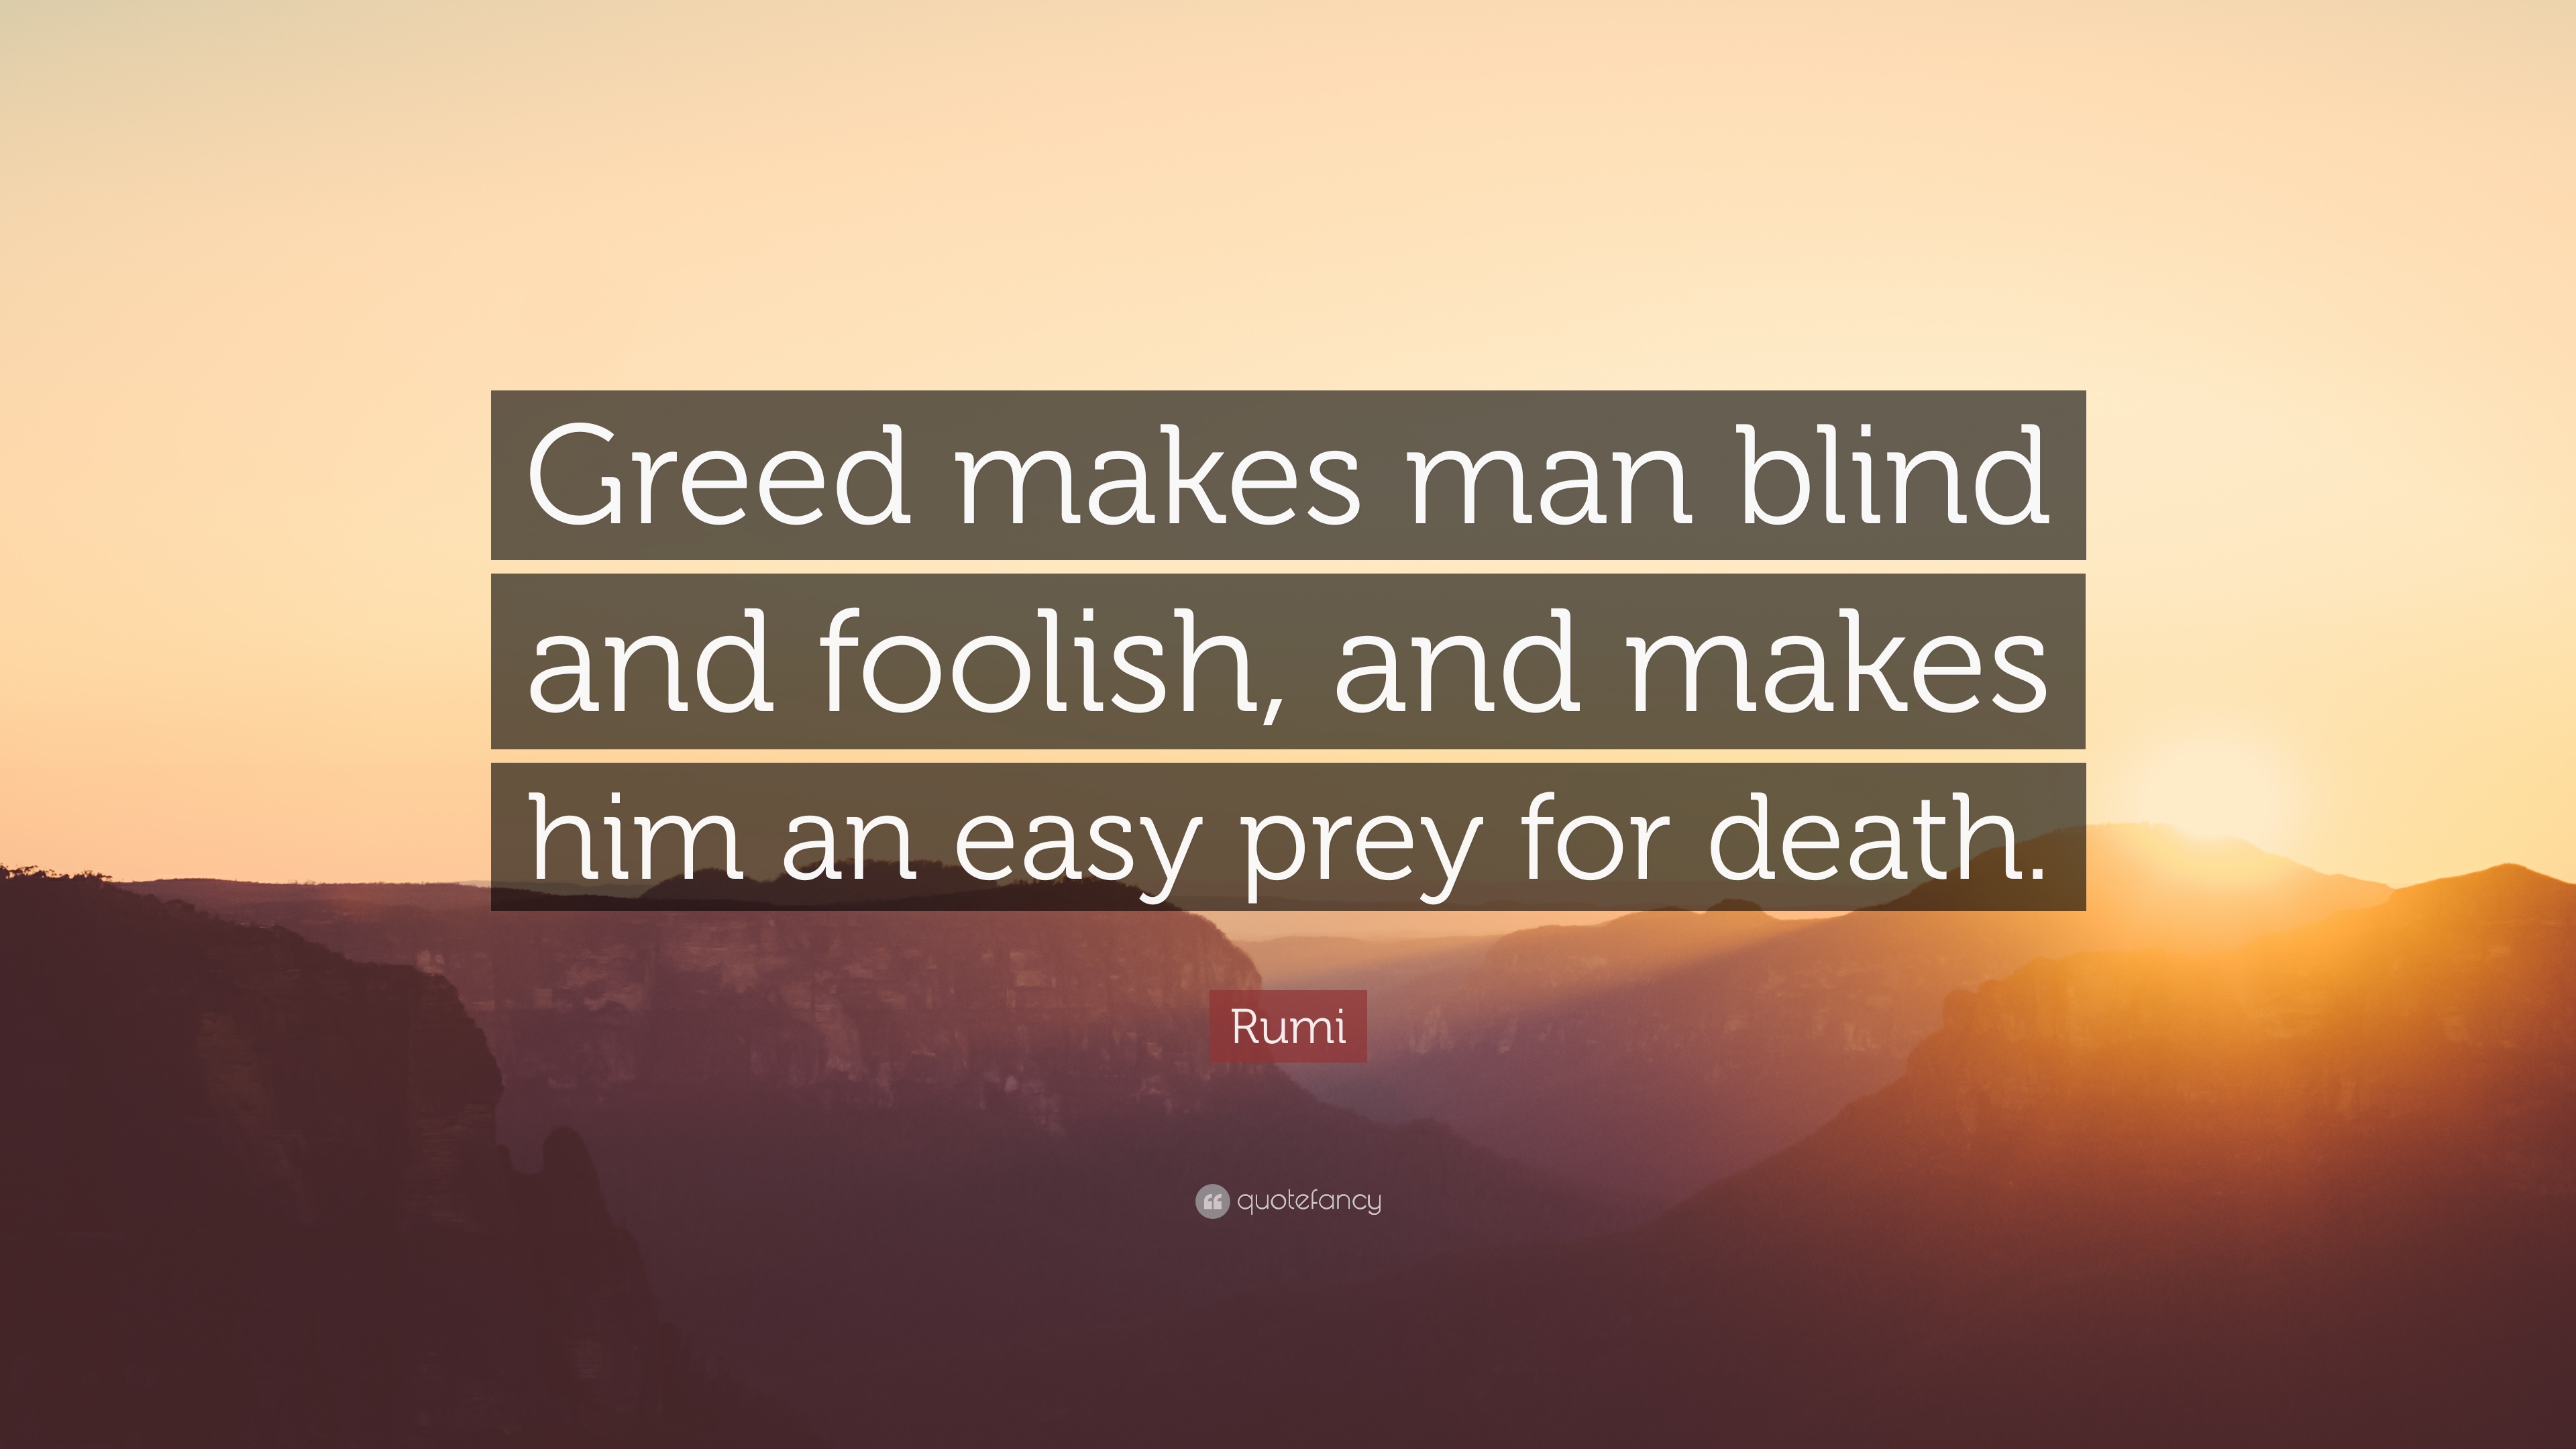 133289-Rumi-Quote-Greed-makes-man-blind-and-foolish-and-makes-him-an-easy.jpg